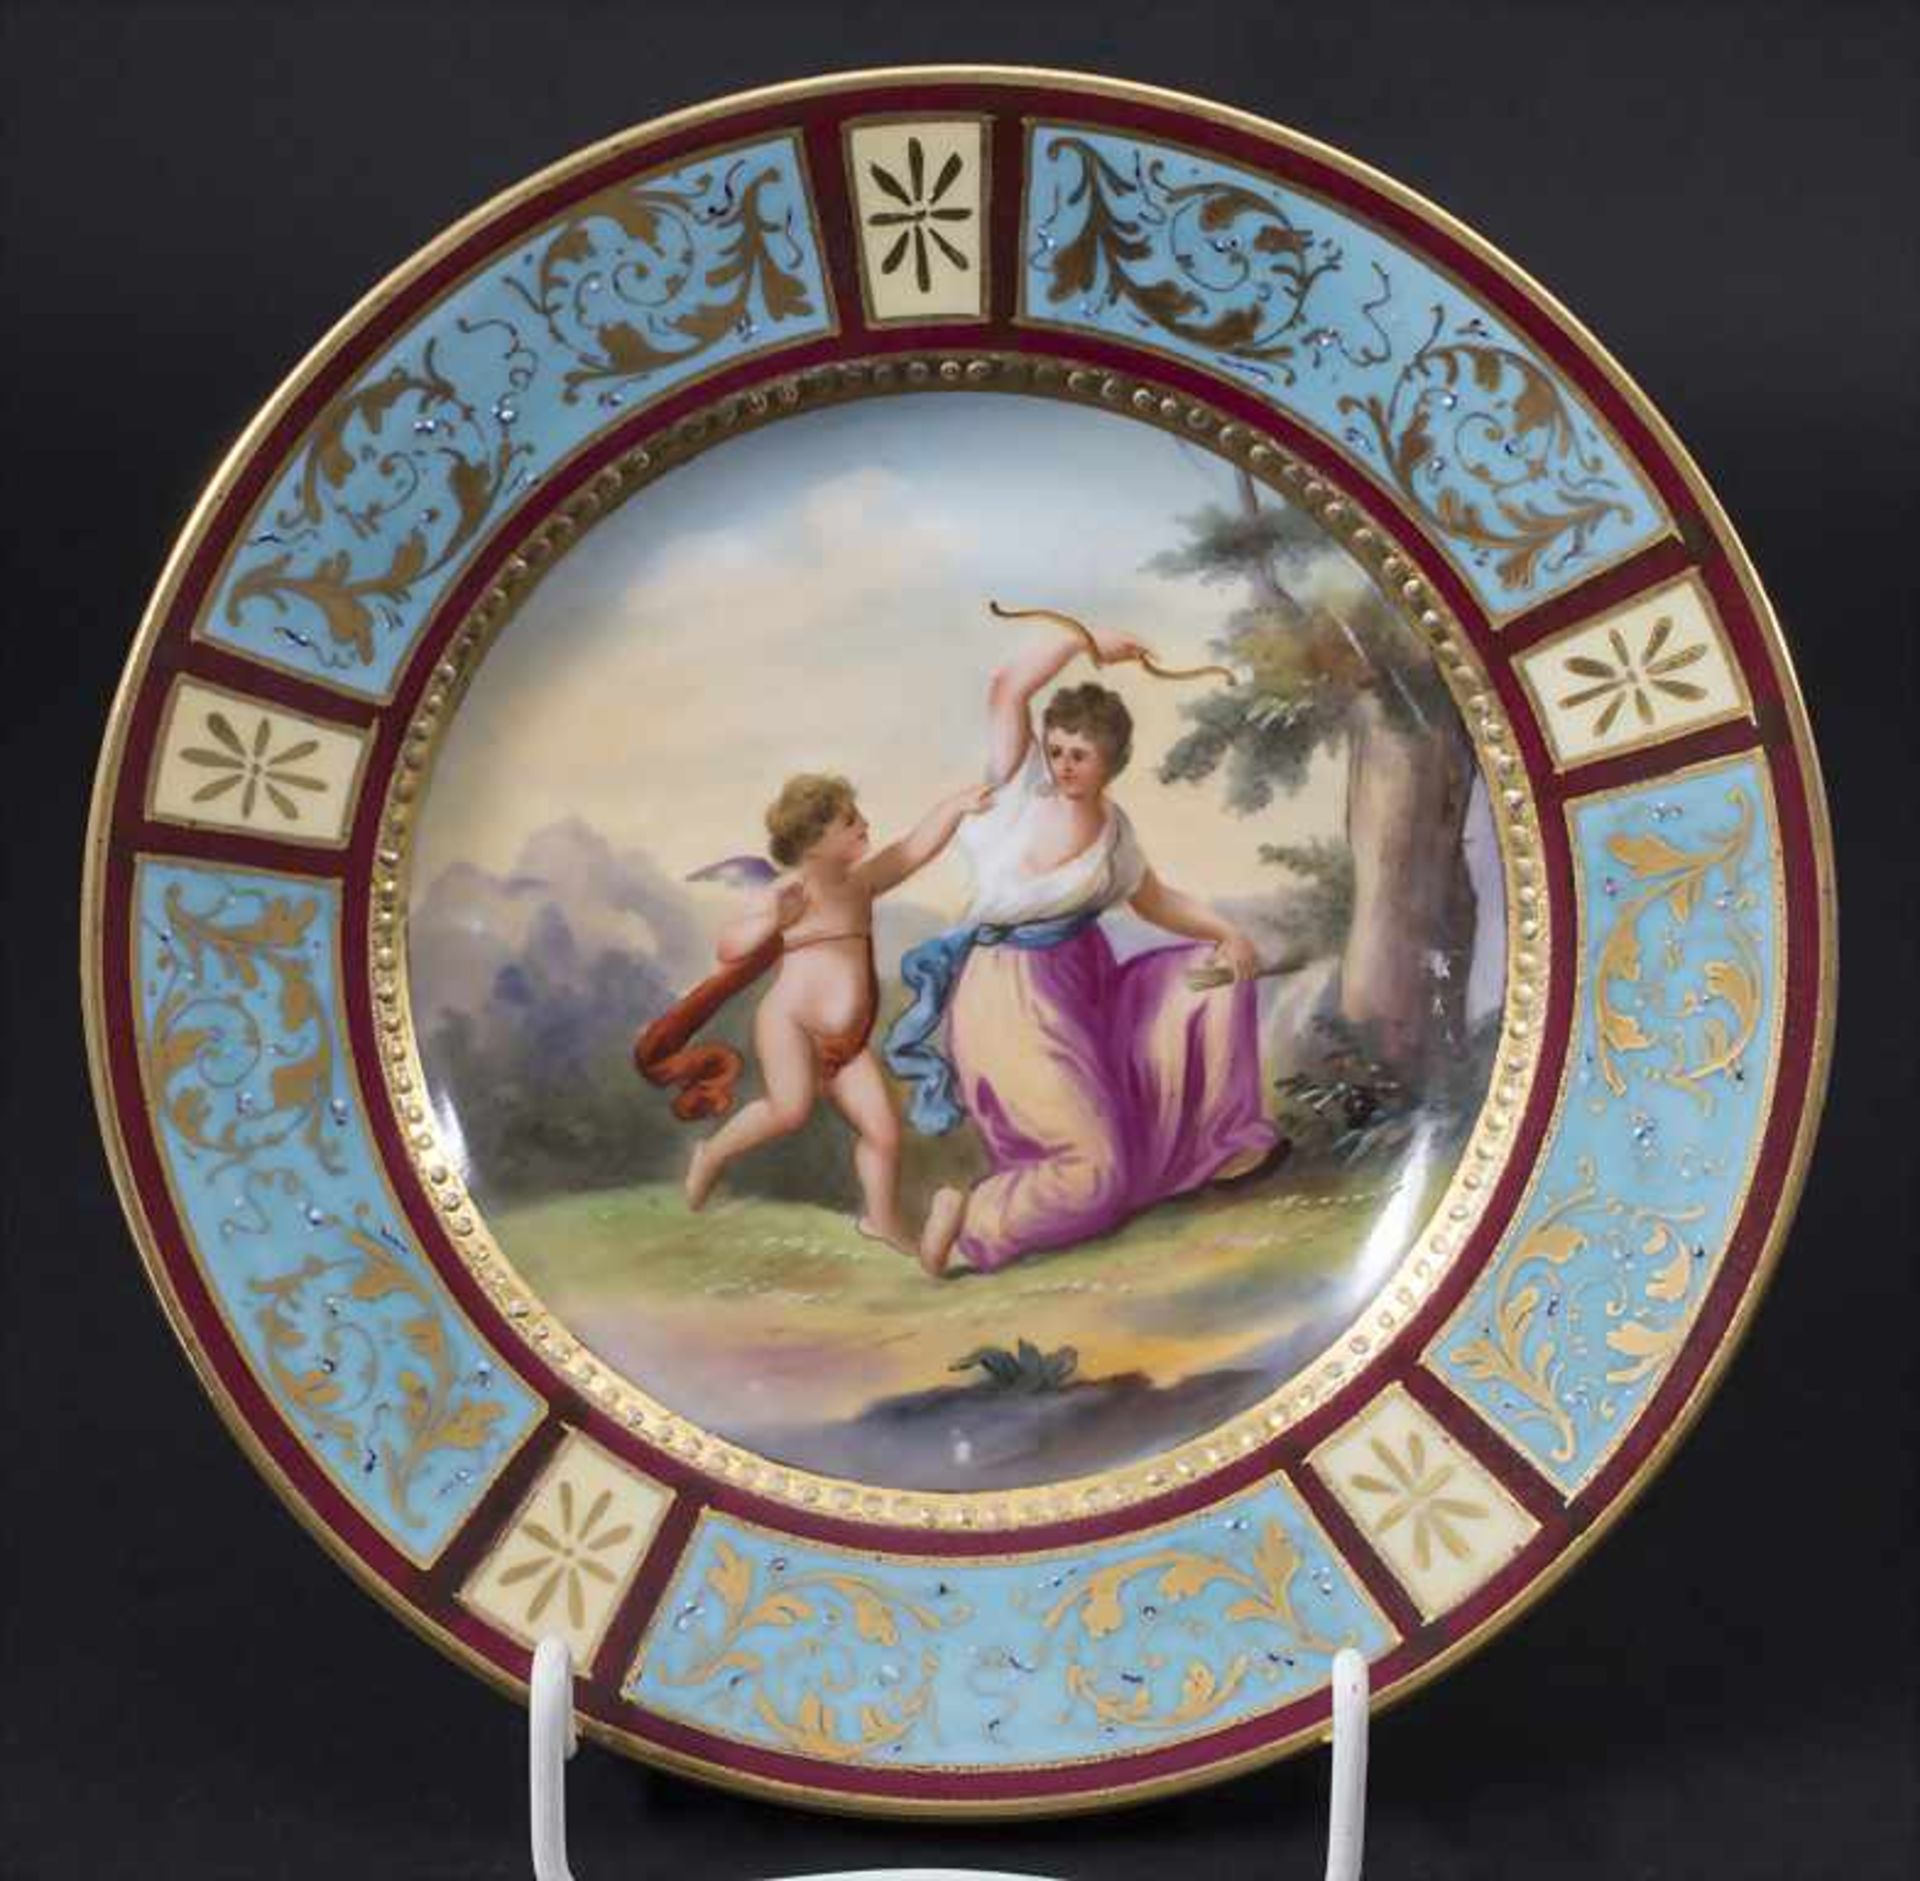 Bild-Teller / A plate depicting a cupid with a young woman, wohl Böhmen, um 1880